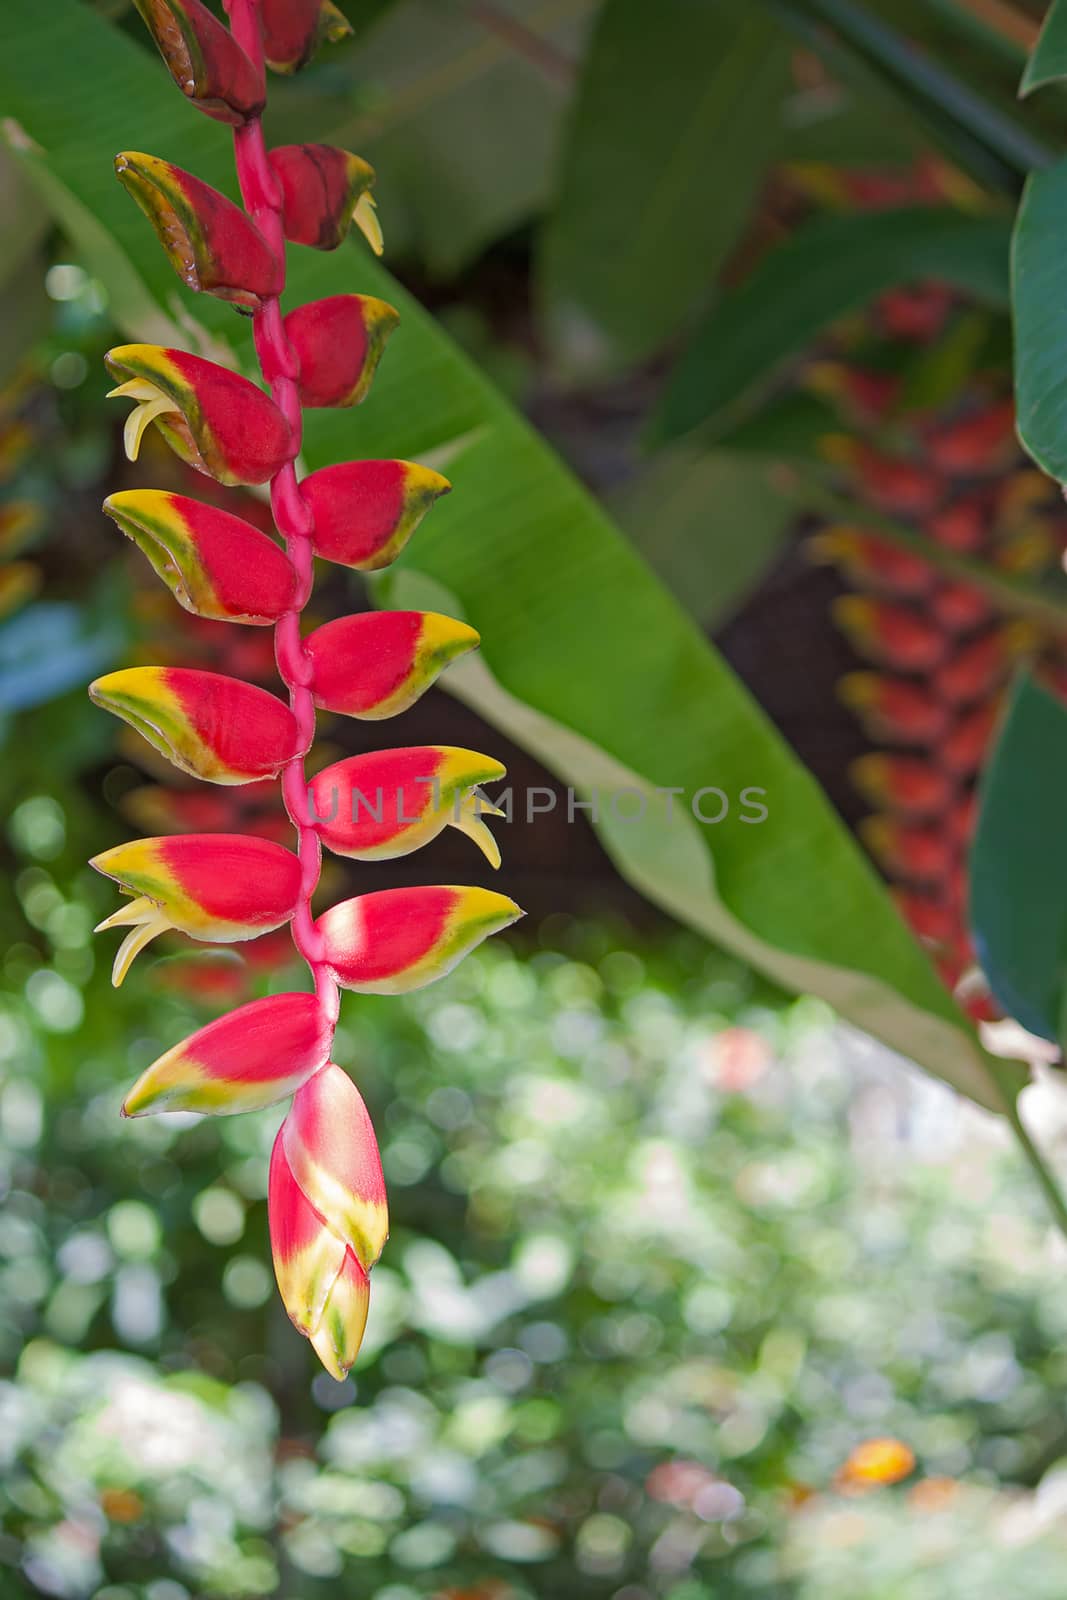 heliconia flowers by zhannaprokopeva